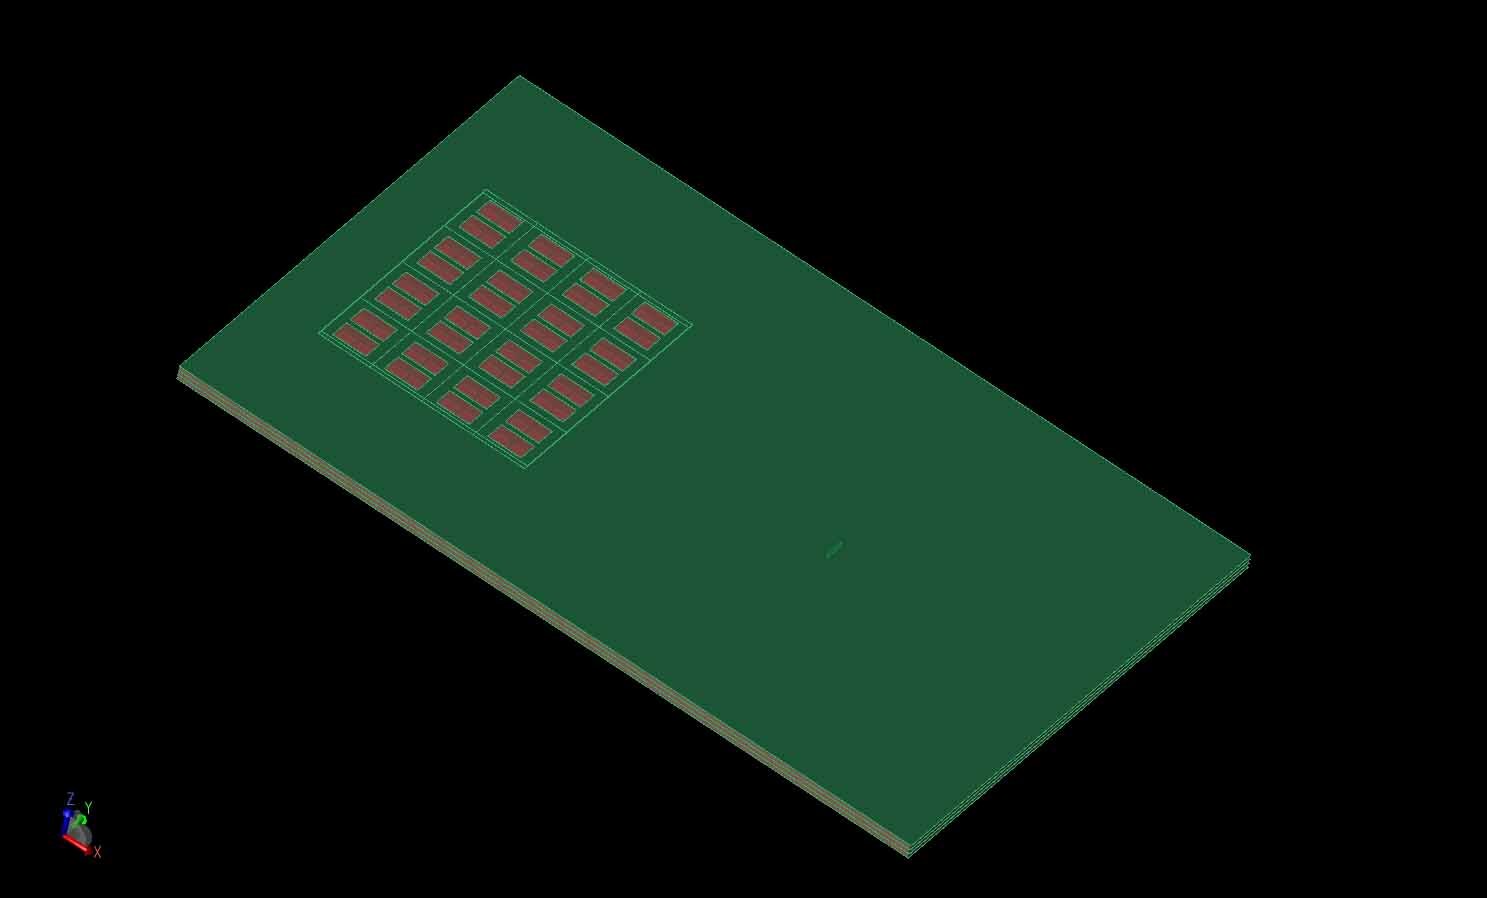 Figure 16:  The full antenna array structure is shown with the 8x8 elements visible at the top of a 25x10 mm layered sheet.